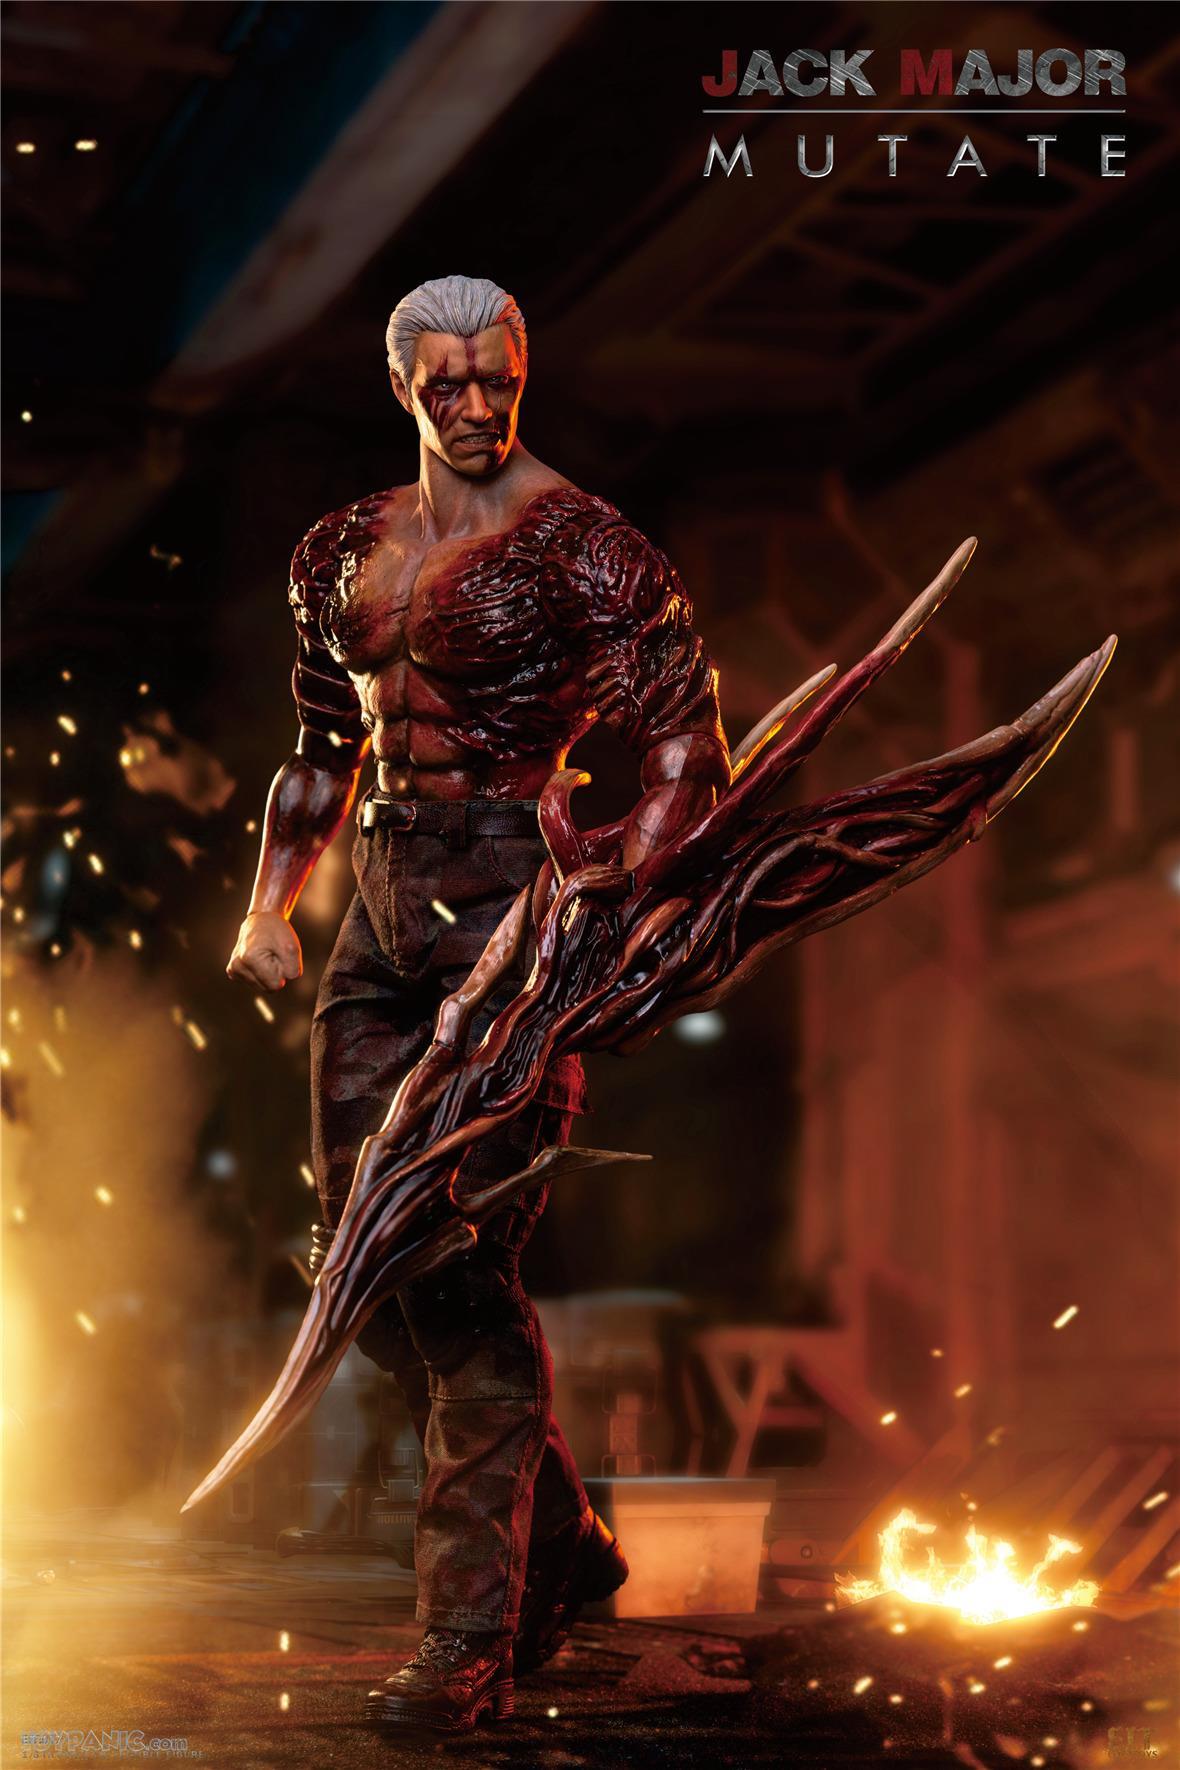 residentevil - NEW PRODUCT:  1/6 Jack Major Mutate from End I Toys  2732024105950AM_6150423